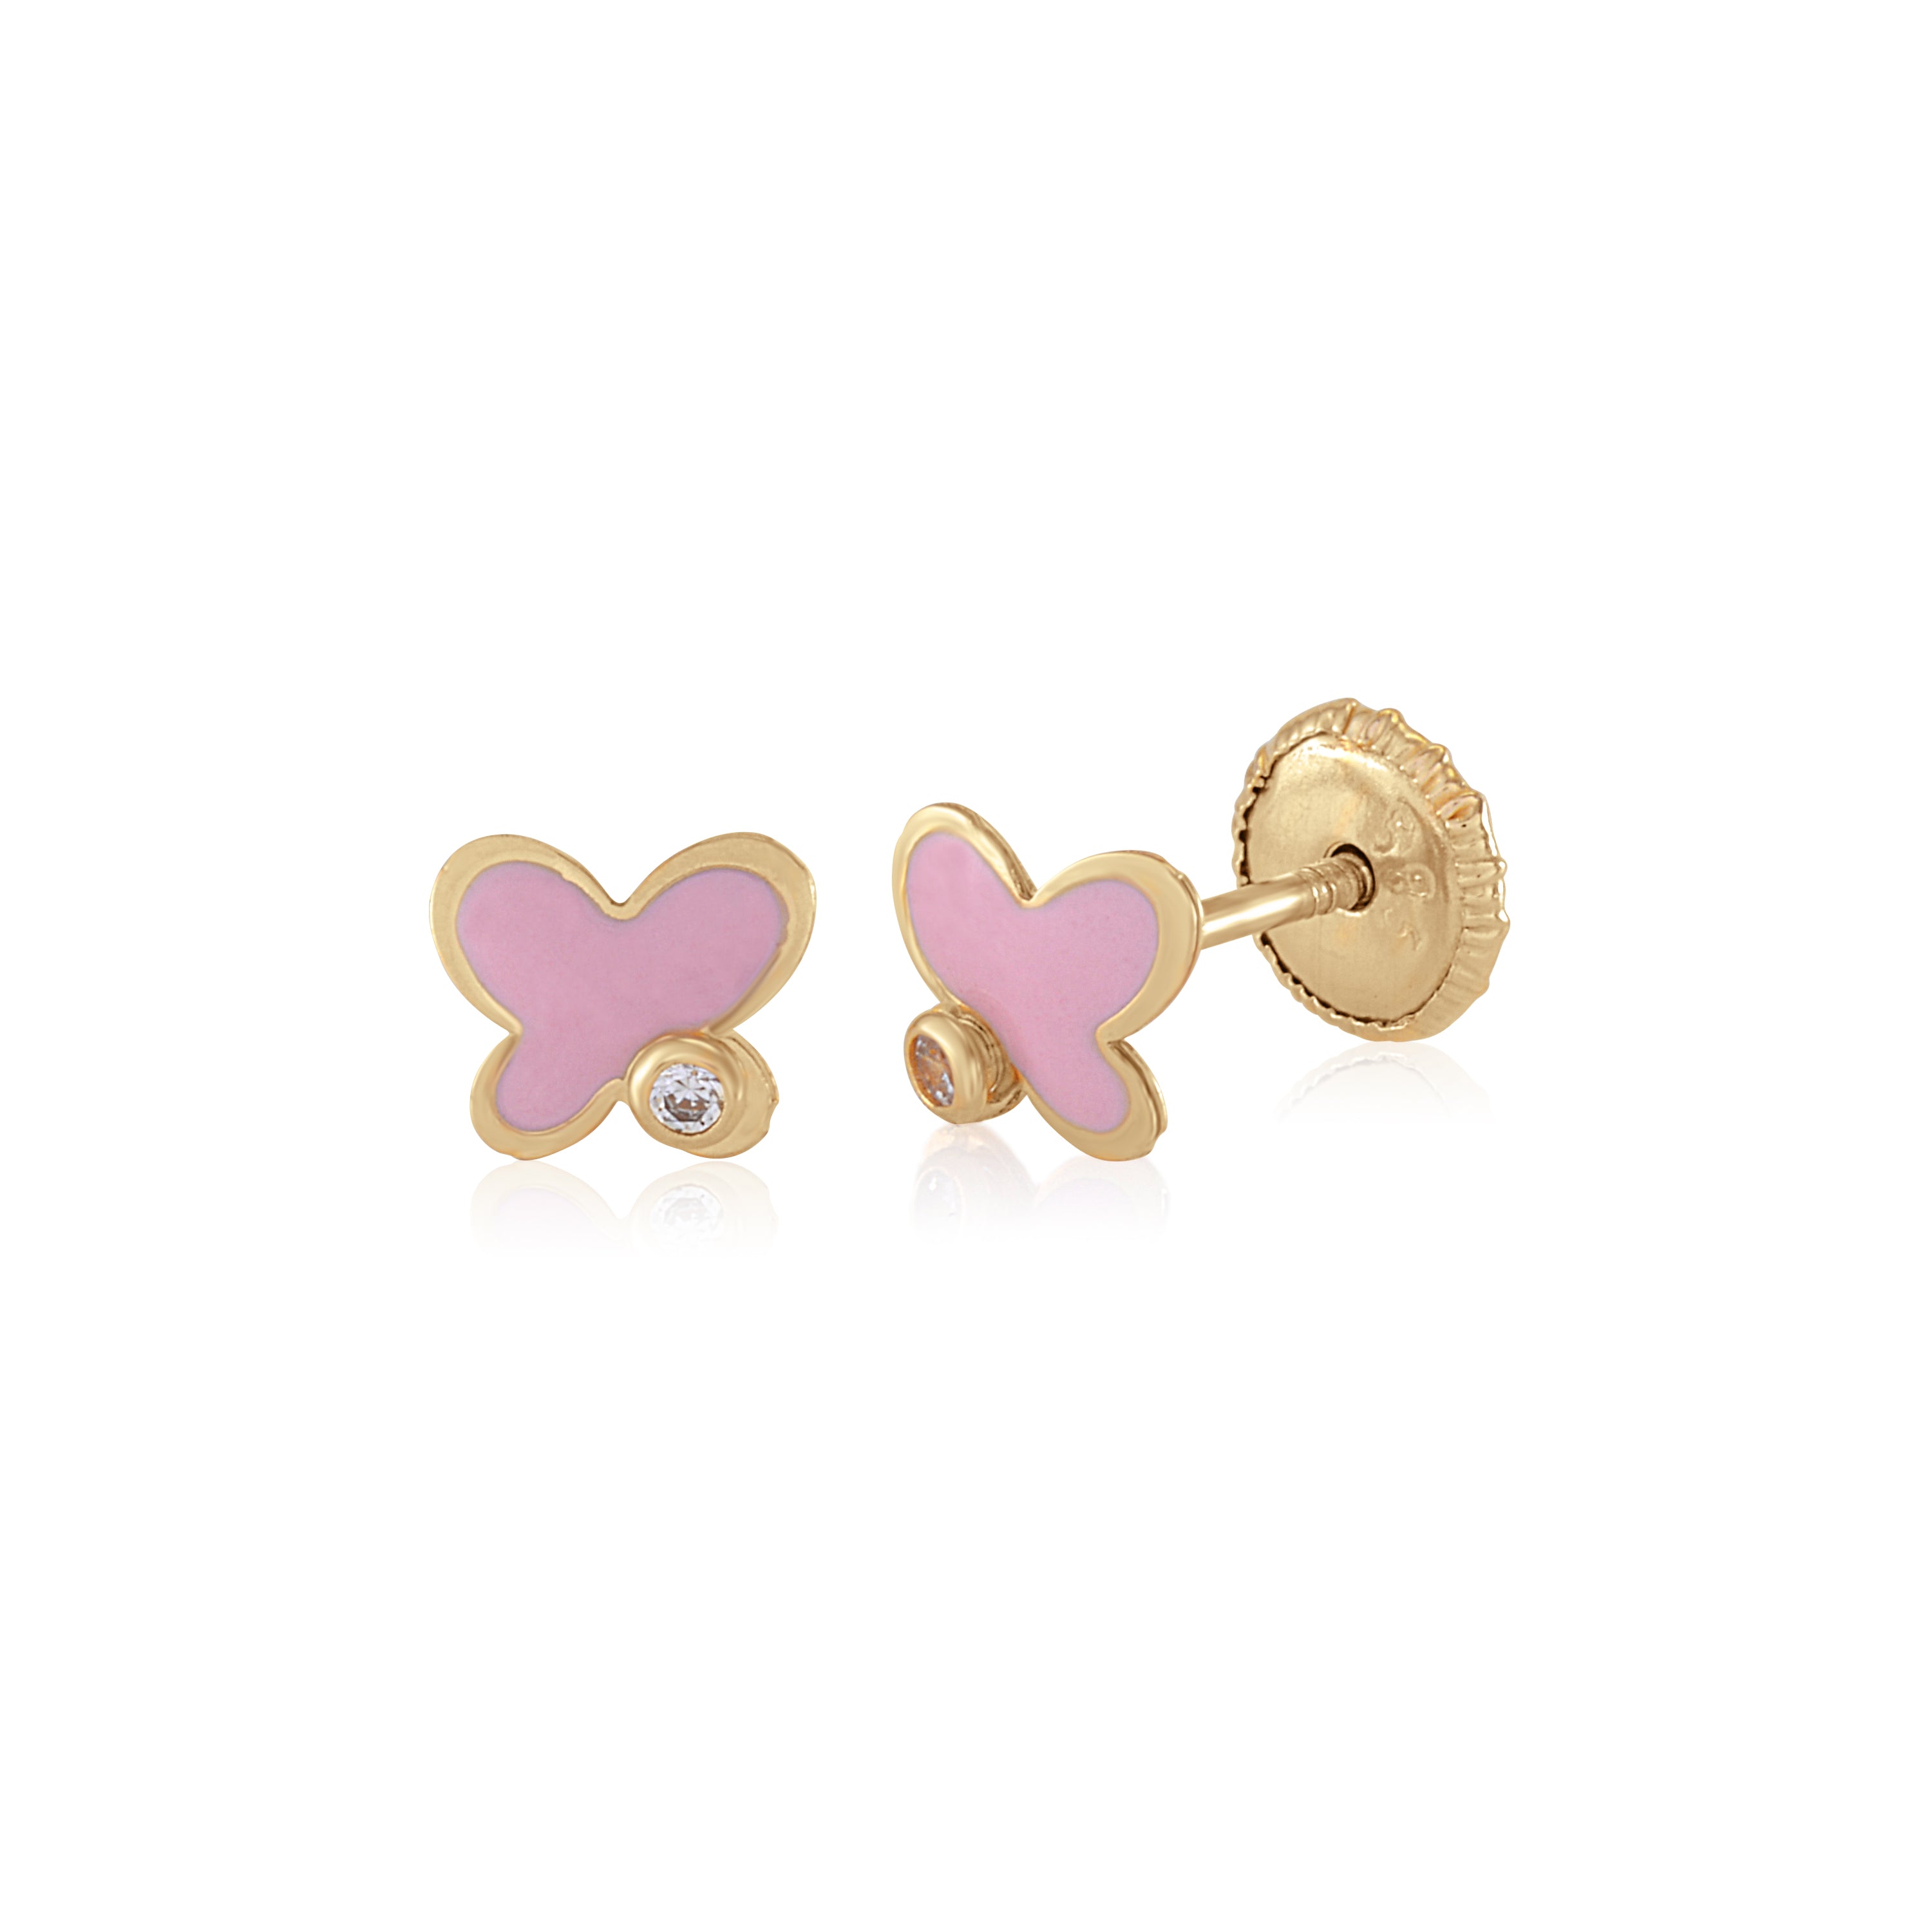 MASSETE 14k Yellow Gold Screwback Earrings Butterfly Pink and CZ Accent for Children